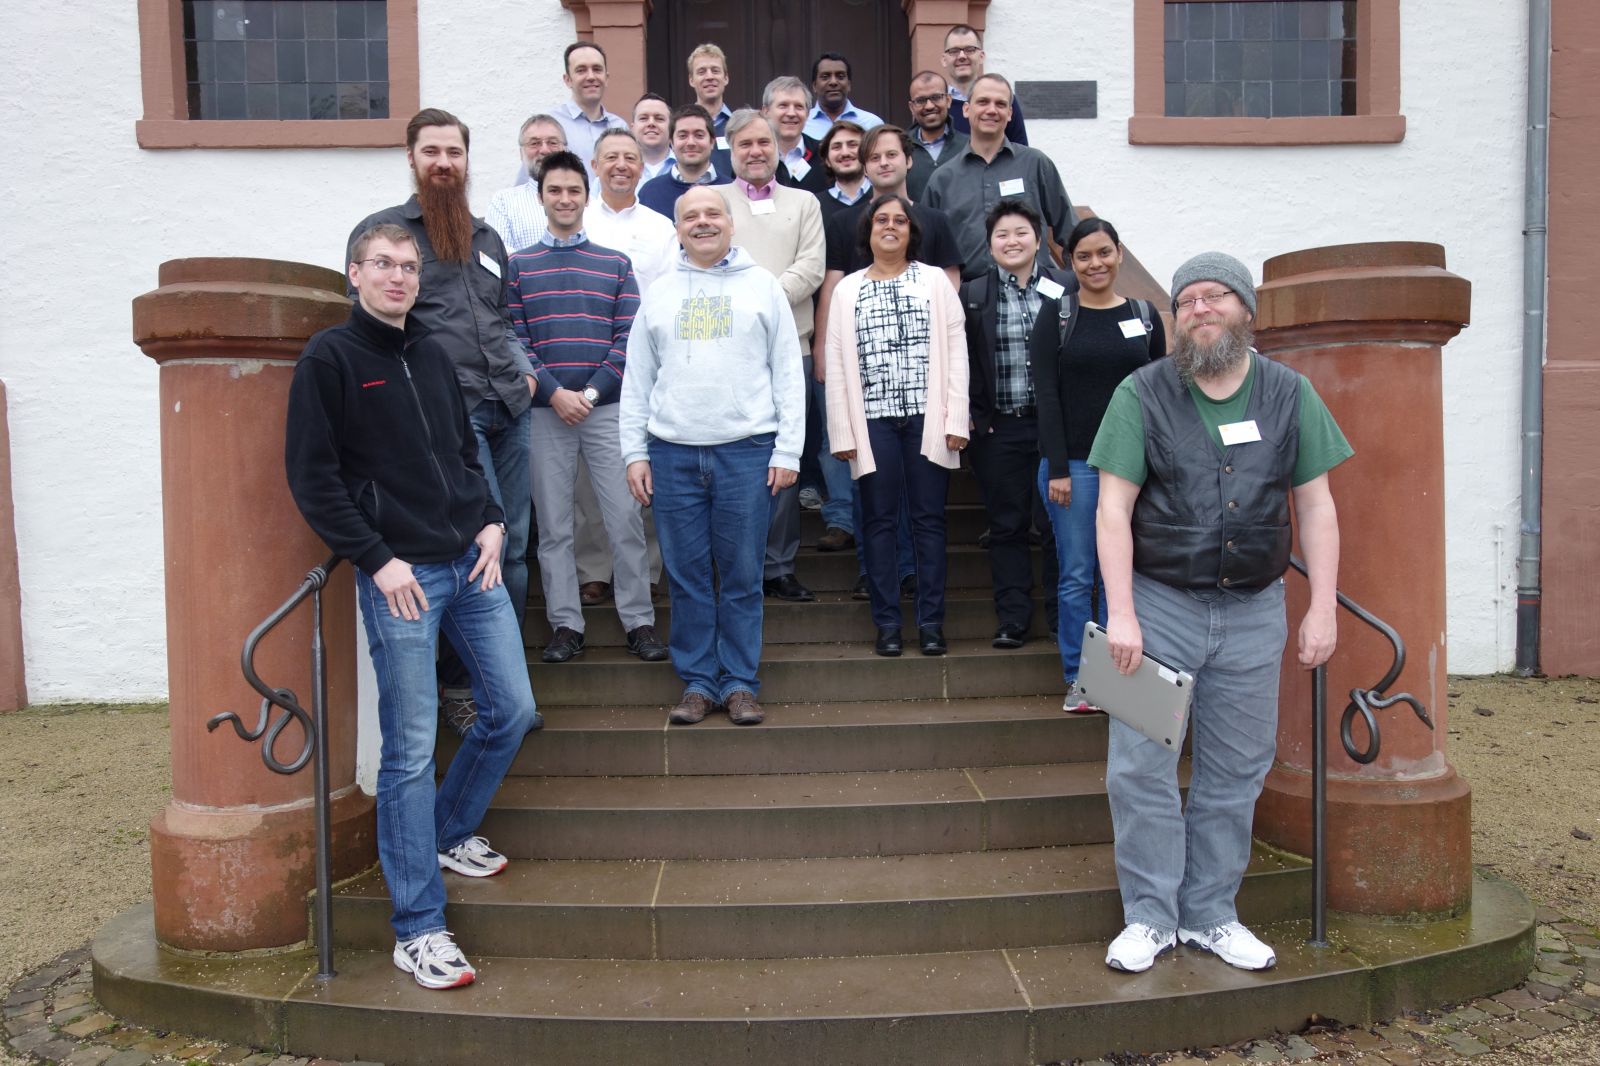 Towards entry "01.02.2016: Dagstuhl Seminar 16052 “Dark Silicon: From Embedded to HPC Systems”"